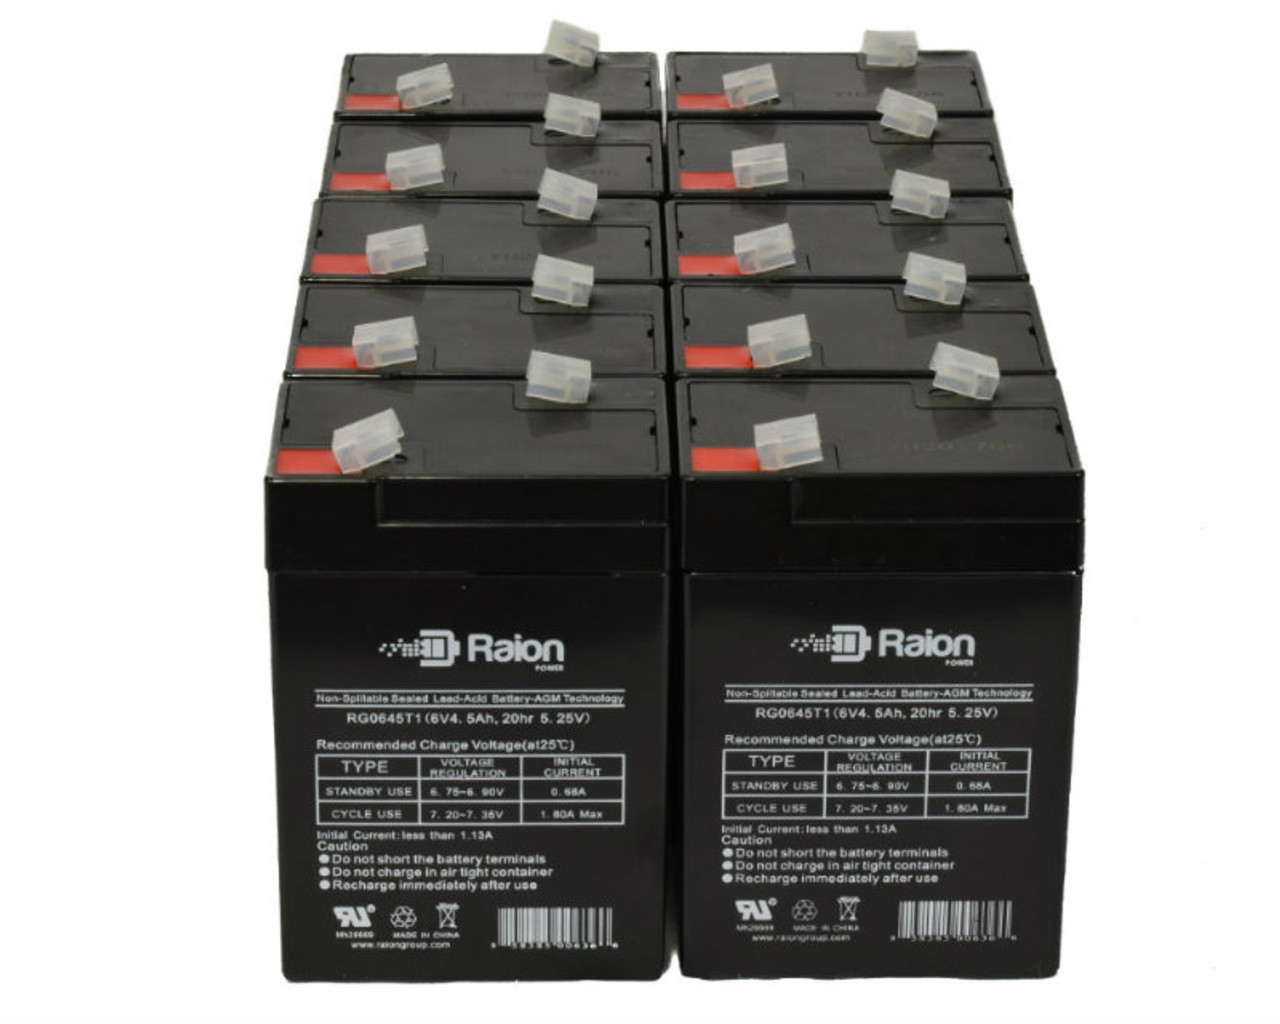 Raion Power 6 Volt 4.5Ah RG0645T1 Replacement Battery for Tianchang TC6-4 - 10 Pack